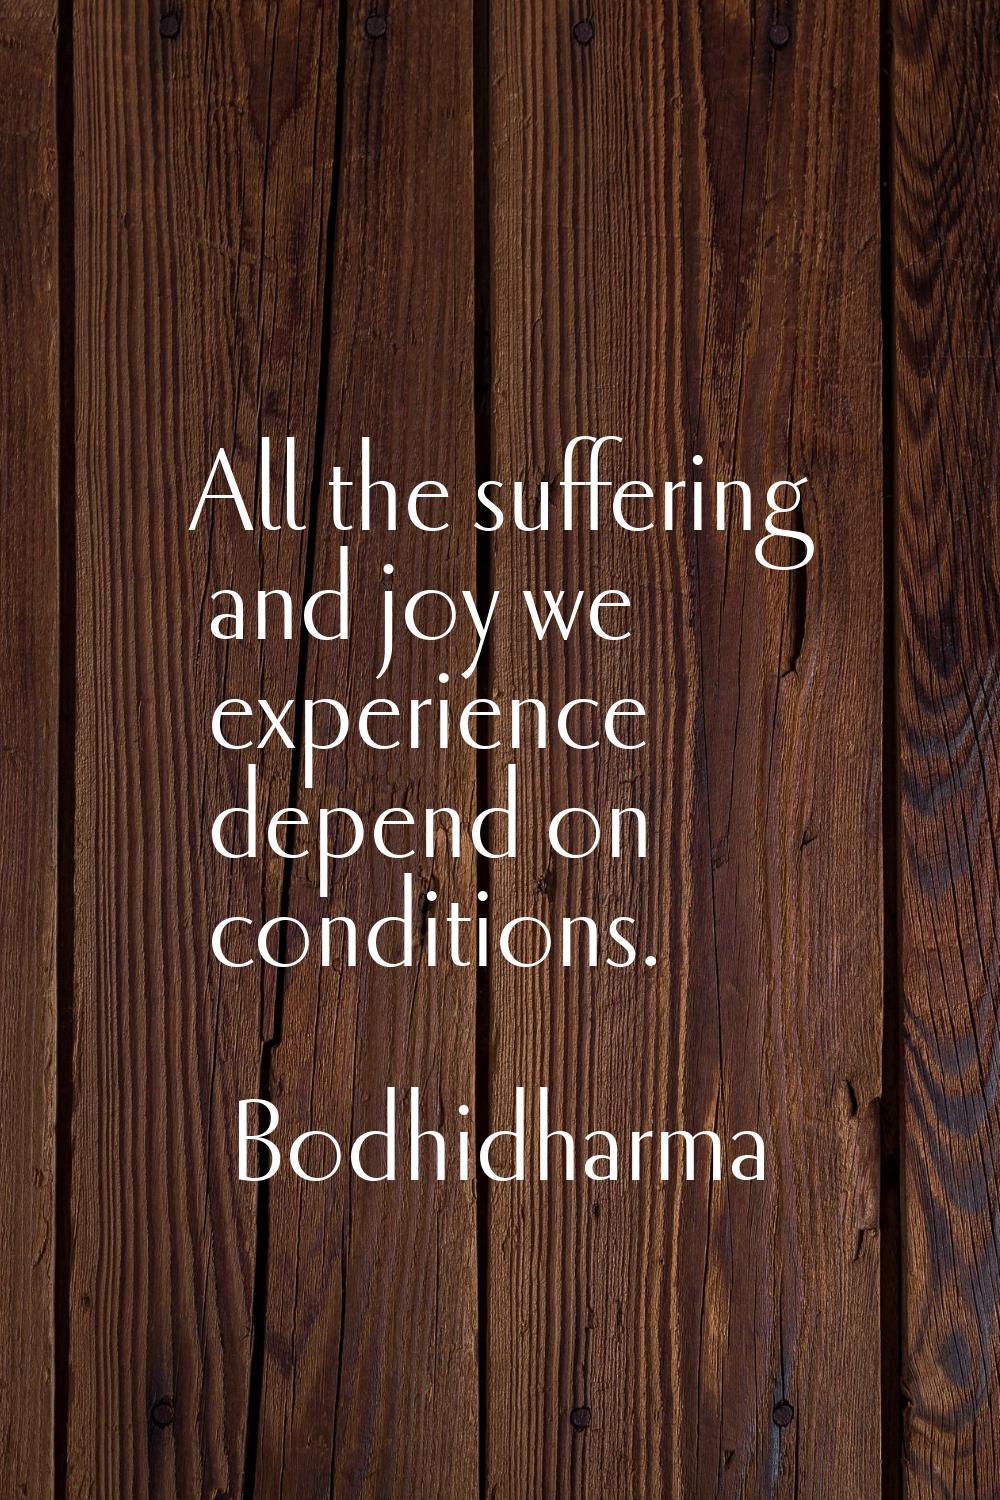 All the suffering and joy we experience depend on conditions.